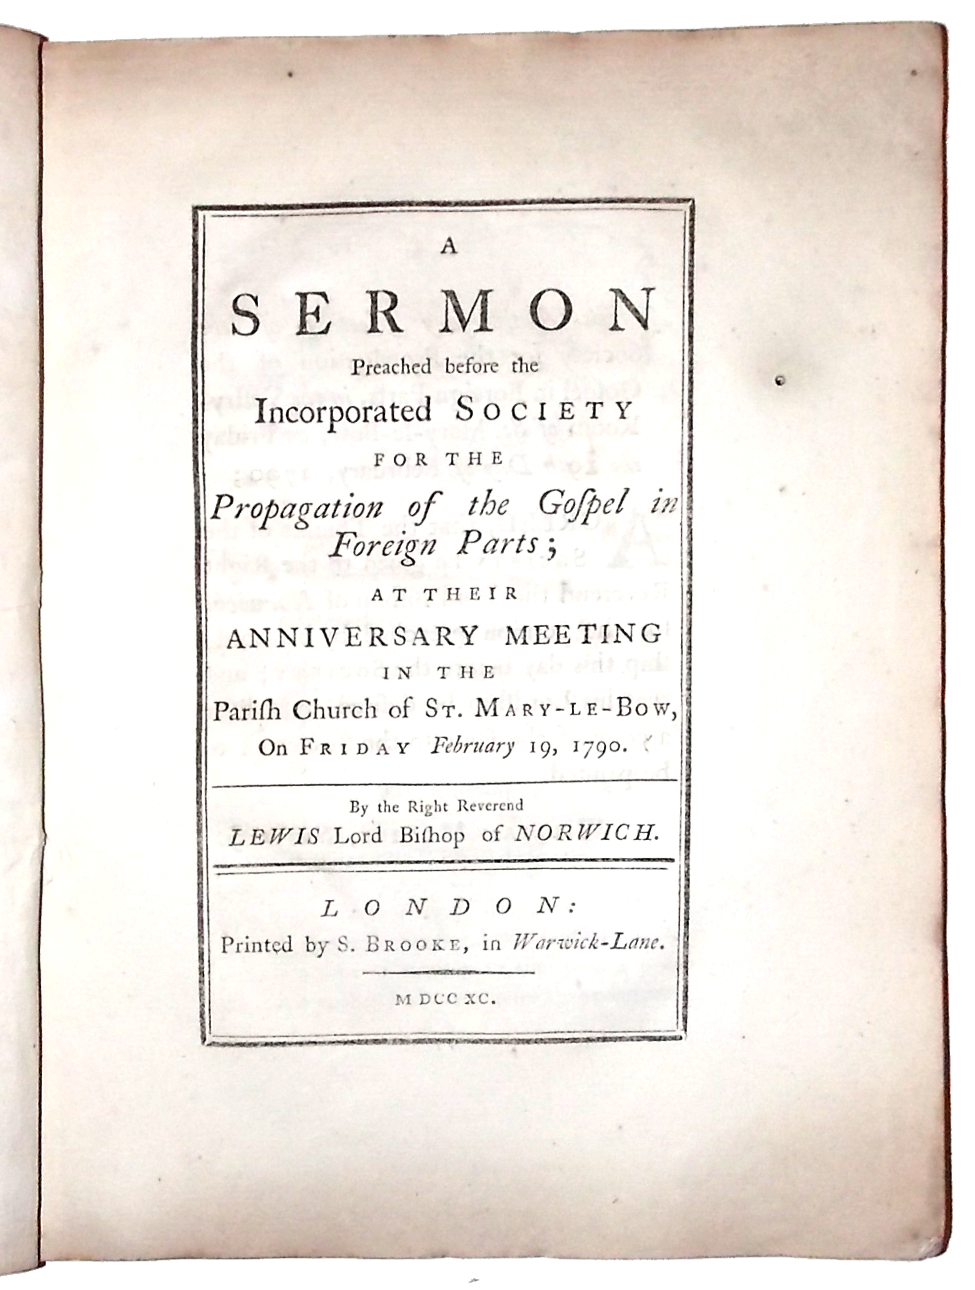 A Sermon Preached before the Incorporated Society for the Propagation of the Gospel in Foreign Parts; at their Anniversary Meeting in the Parish Church of St. Mary-Le-Bow, on Friday February 19, 1790. - Bagot, Lewis, Lord Bishop of Norwich.